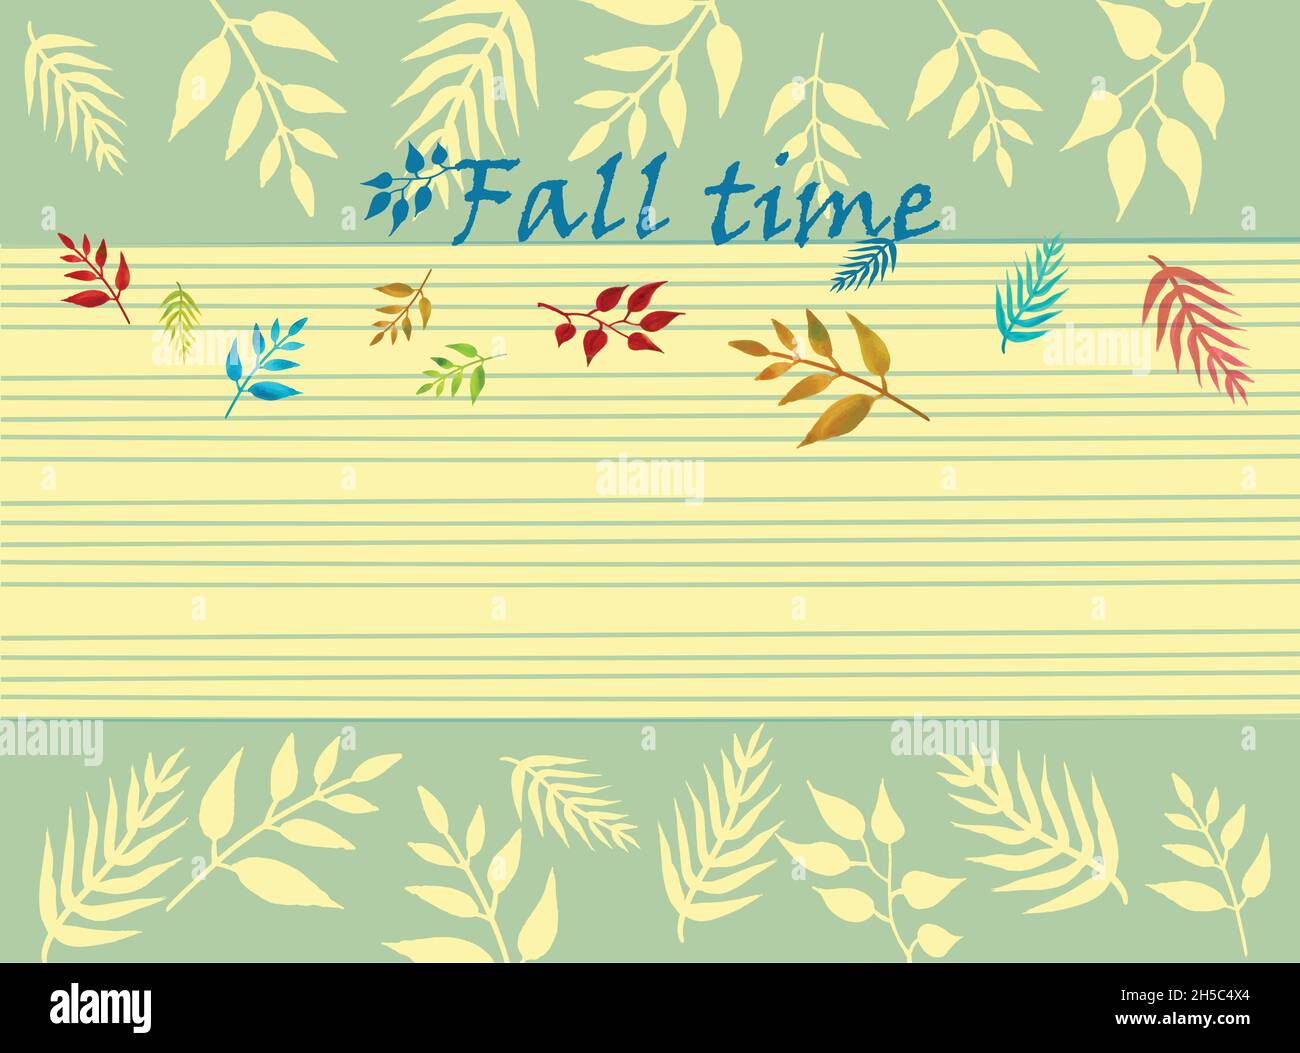 Fall leaves vintage vector card template Stock Vector